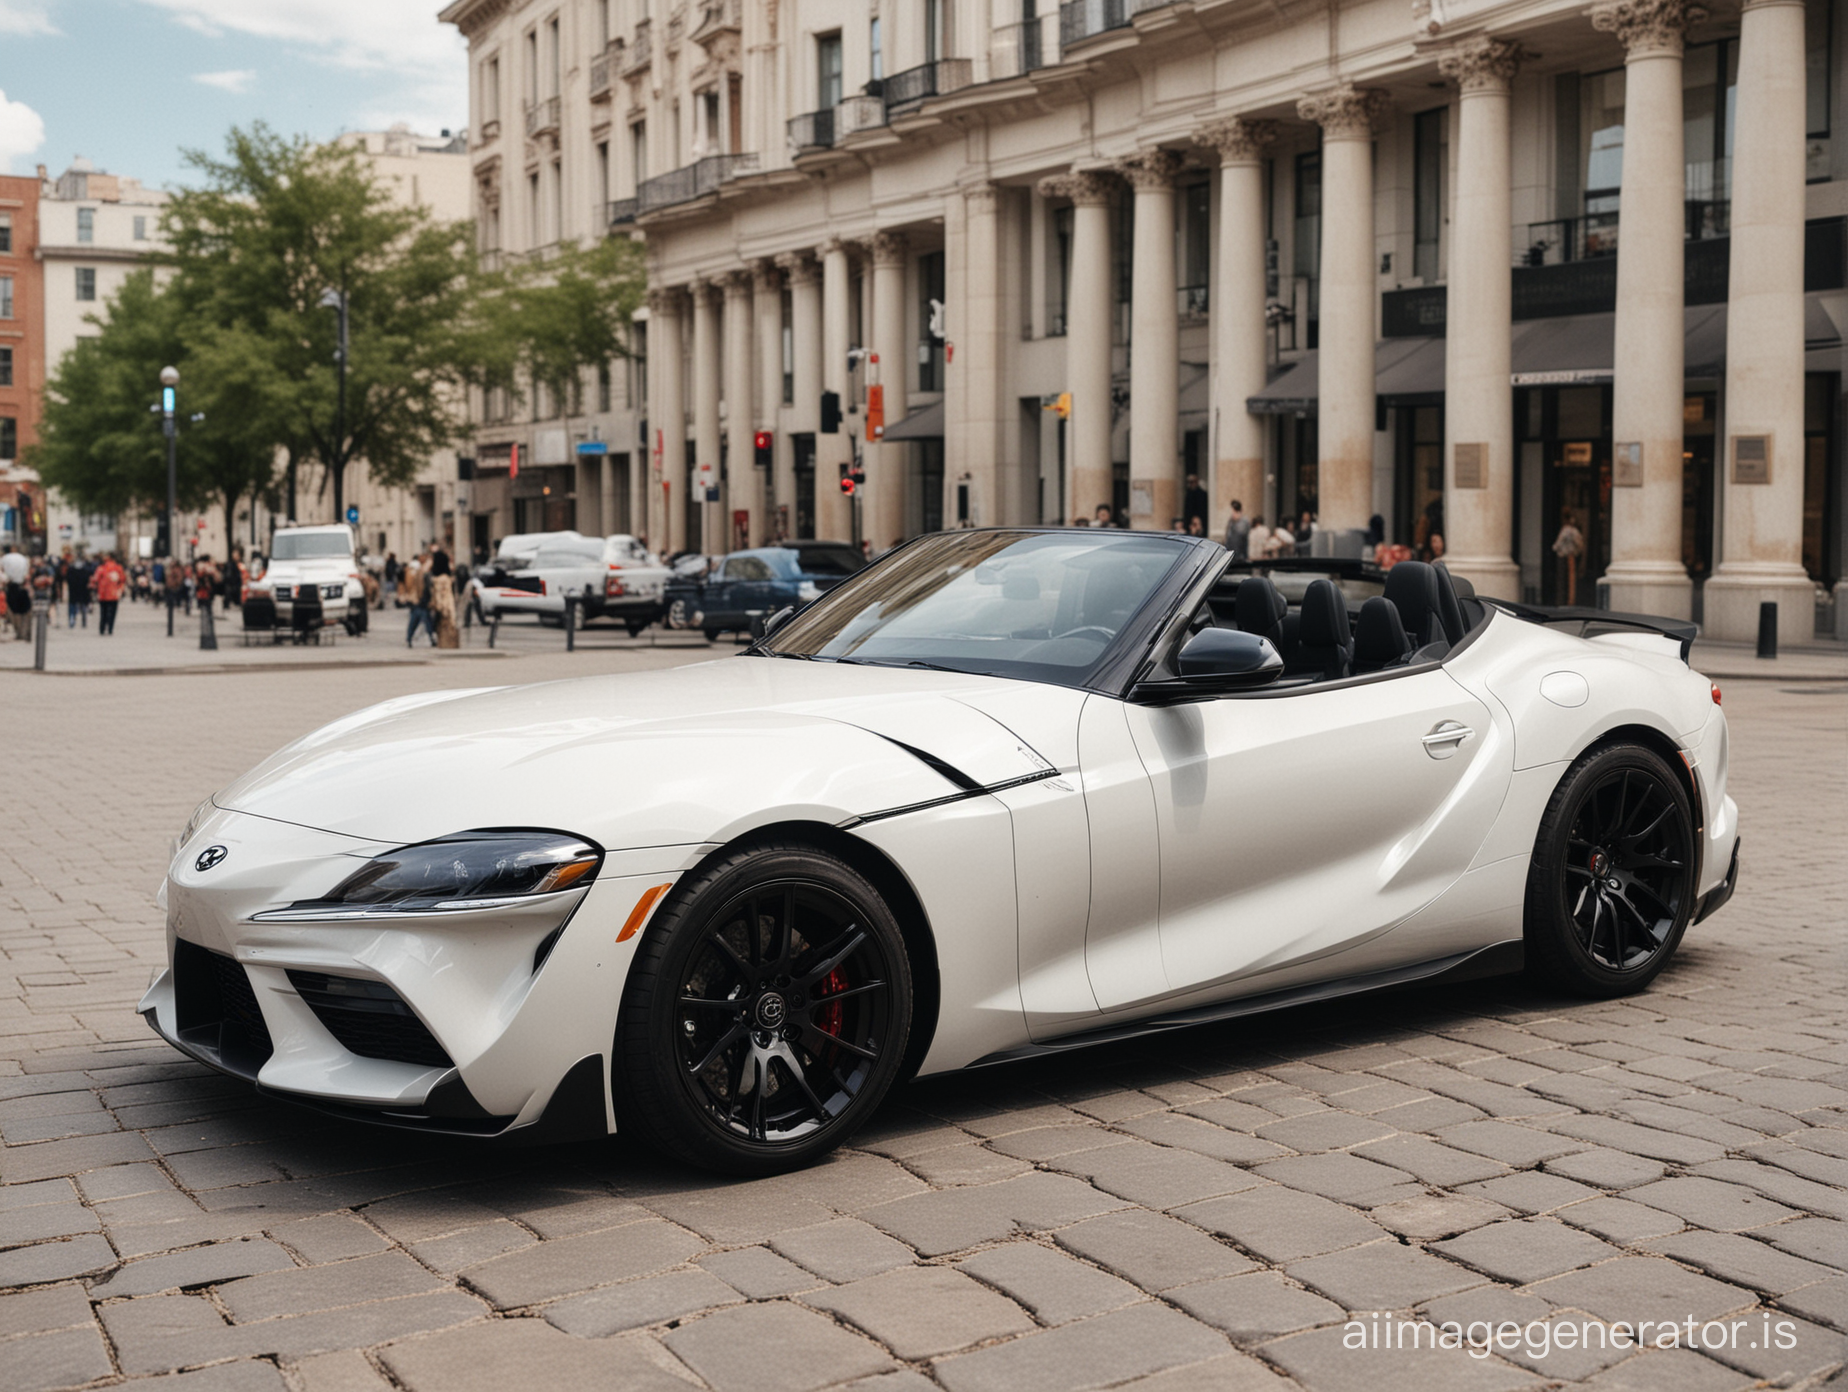 Car in the city: 2023 Toyota Supra convertible. Photograph in a modern city square. 